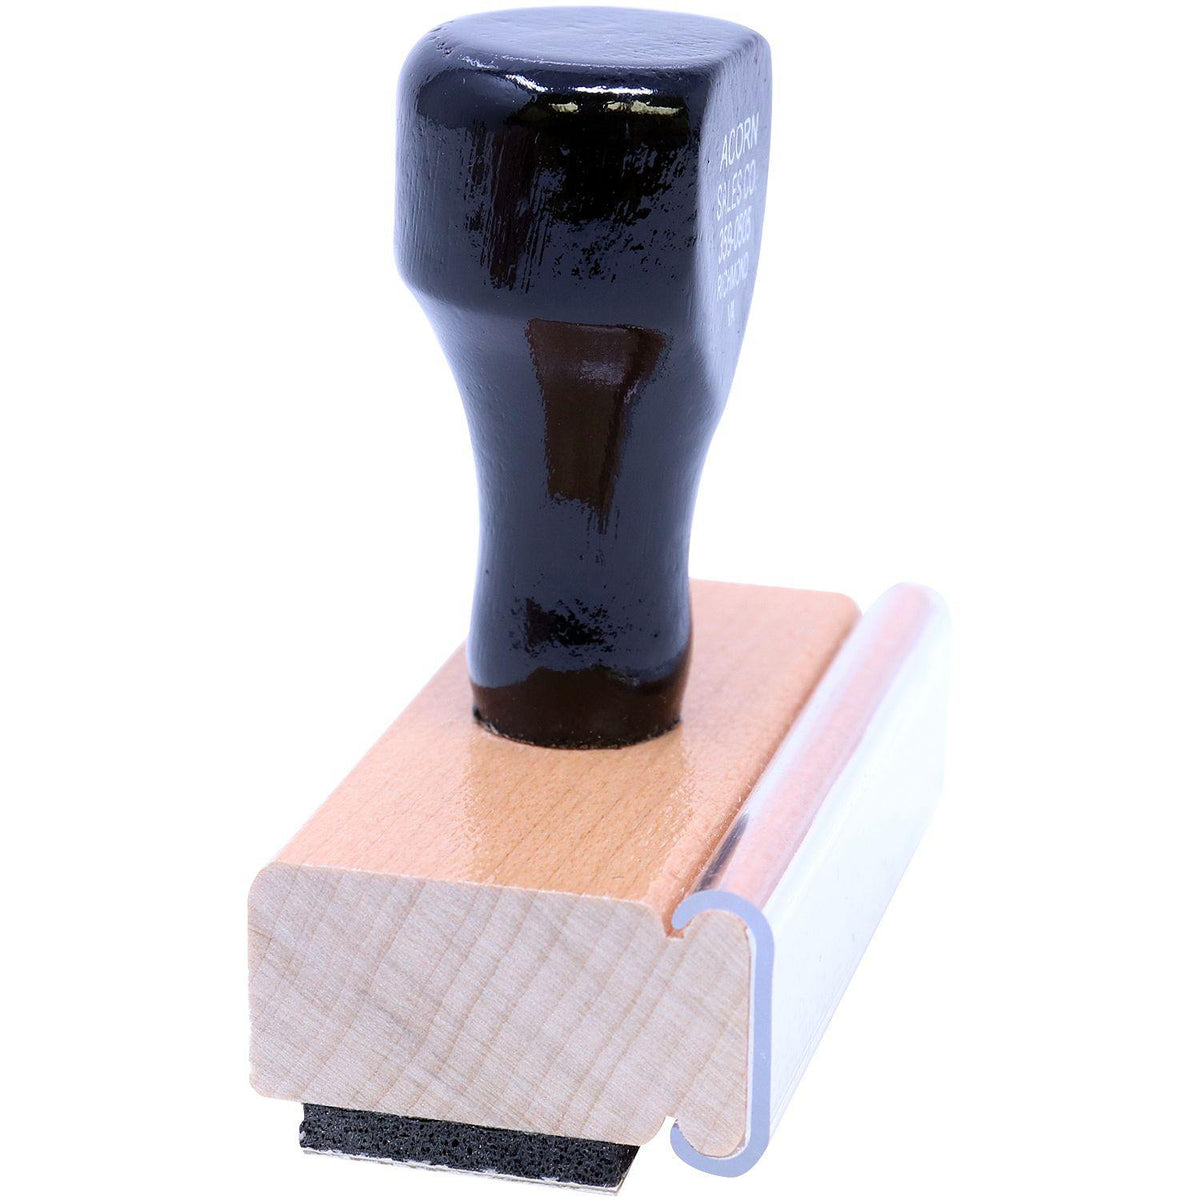 Large Signed with Date Rubber Stamp - Engineer Seal Stamps - Brand_Acorn, Impression Size_Large, Stamp Type_Regular Stamp, Type of Use_General, Type of Use_Signature